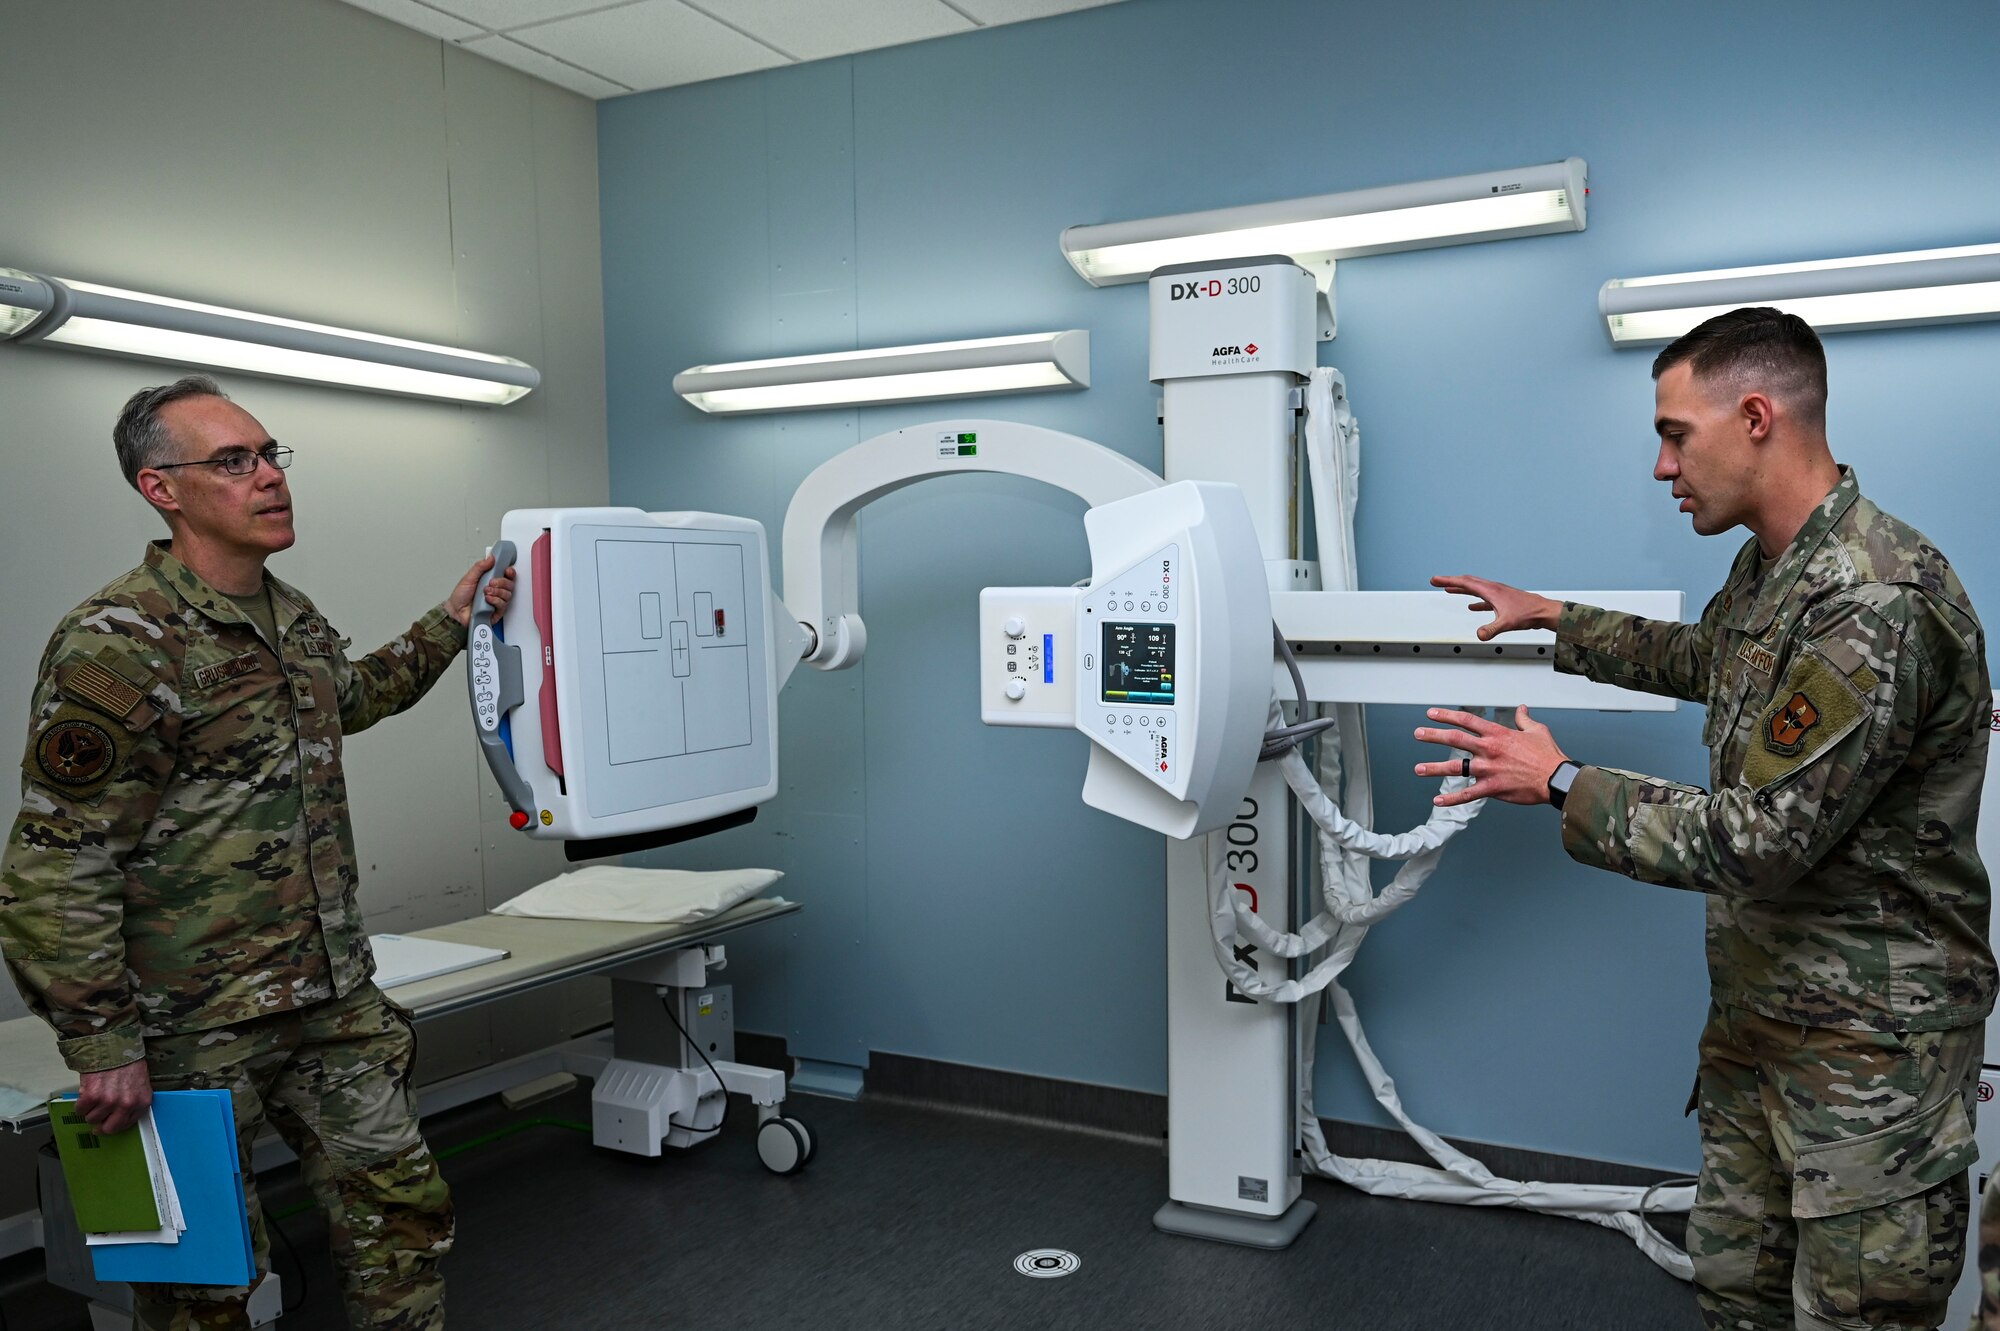 U.S. Air Force Tech. Sgt. Brandon Clement, 49th Medical Group radiology noncommissioned officer in charge, right, explains the capabilities of the DX-D 300 radiology scanner to U.S. Air Force Col. Christopher Grussendorf, Air Education and Training Command surgeon general at Holloman Air Force Base, New Mexico, April 13, 2023. The 49th MDG is responsible for providing care for all Airmen, Guardians, dependents and retirees on base. (U.S. Air Force photo by Airman 1st Class Isaiah Pedrazzini)